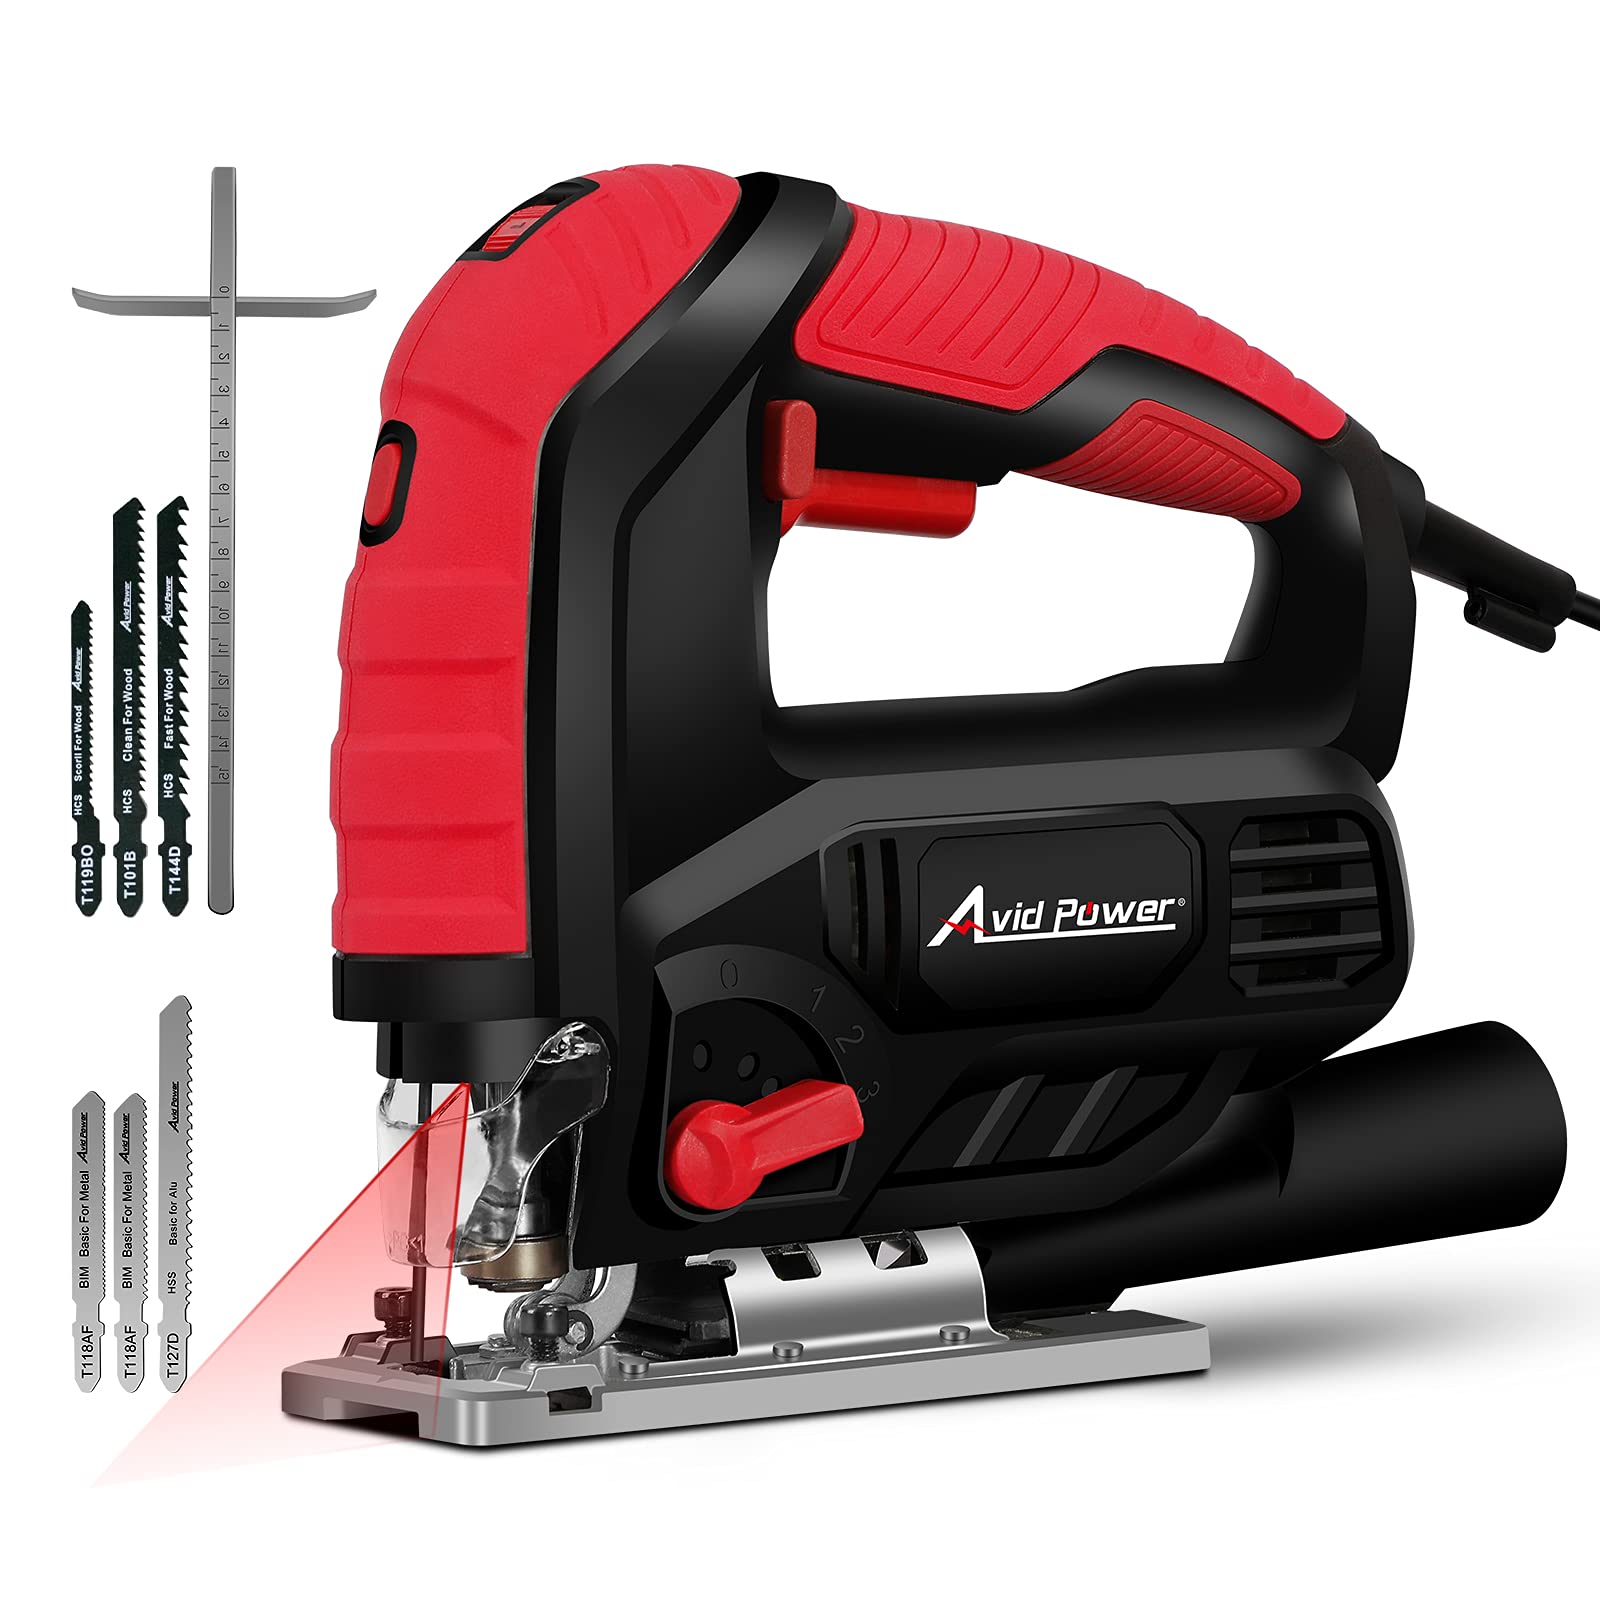 AVID POWER Jig Saw, 7.0A 3000 SPM Jigsaw with Variable Speed, Bevel Angle (0°-45°), 6PCS Blades and Scale Ruler